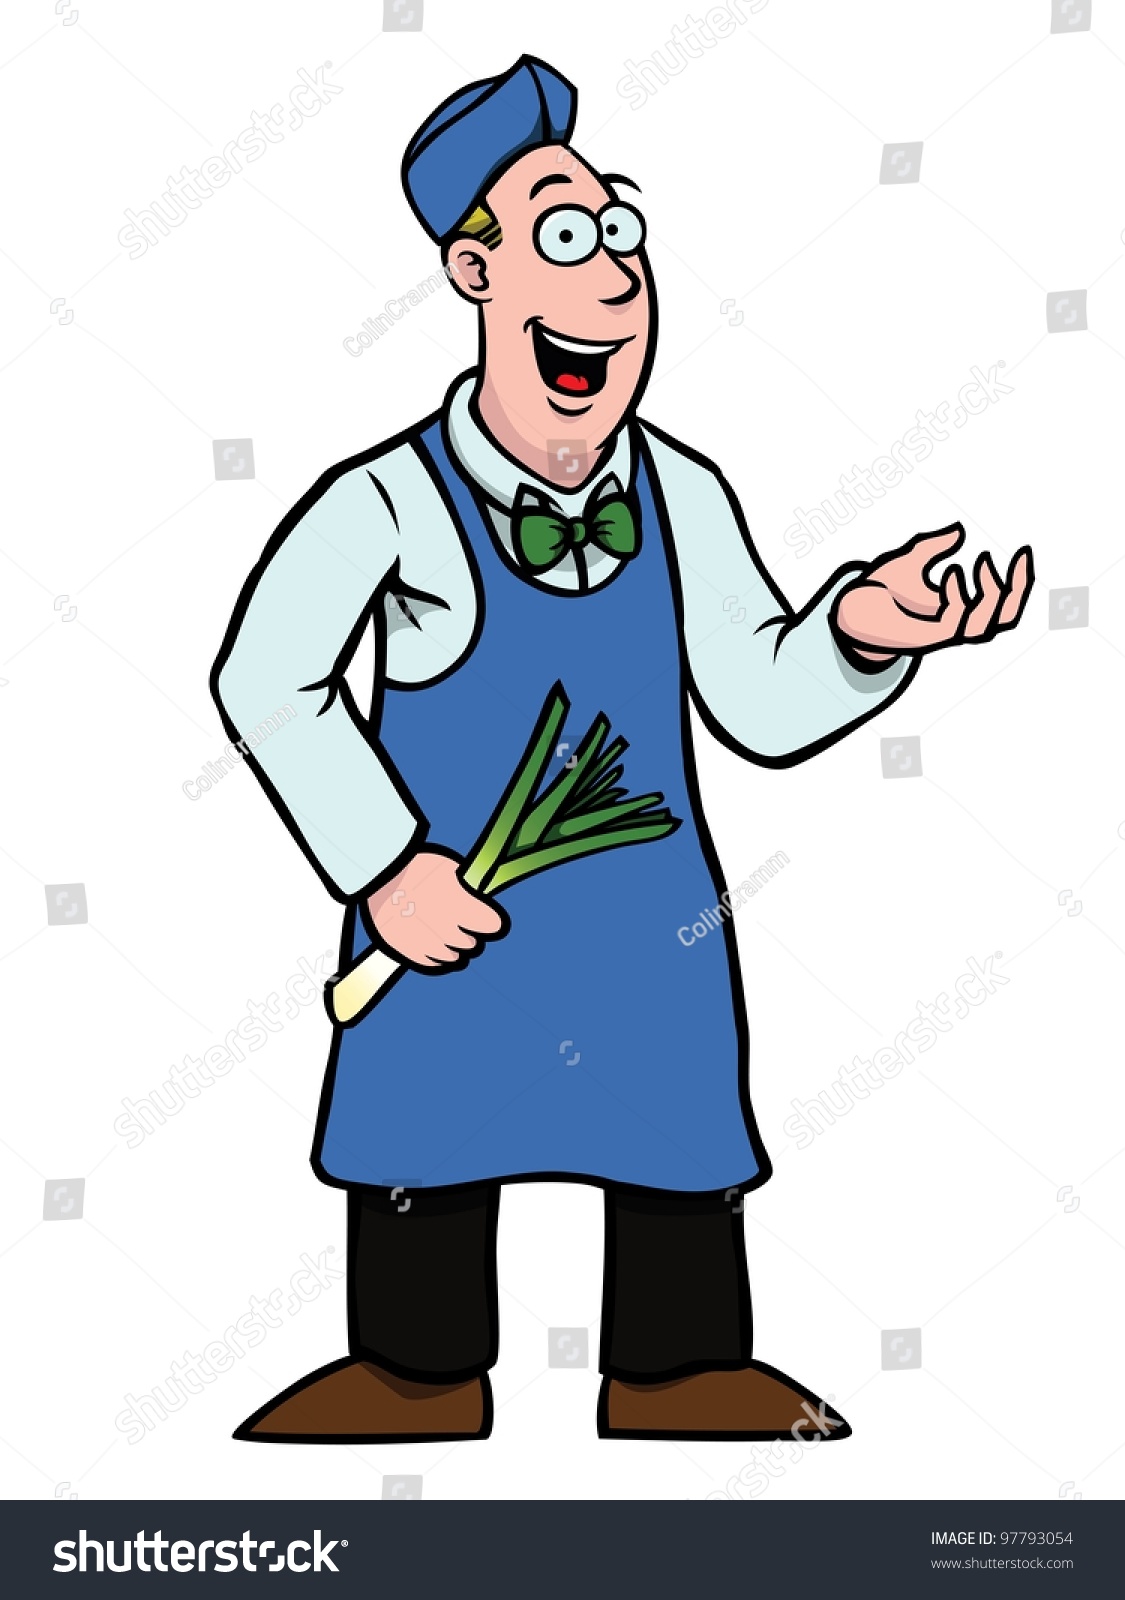 greengrocer clipart - photo #5